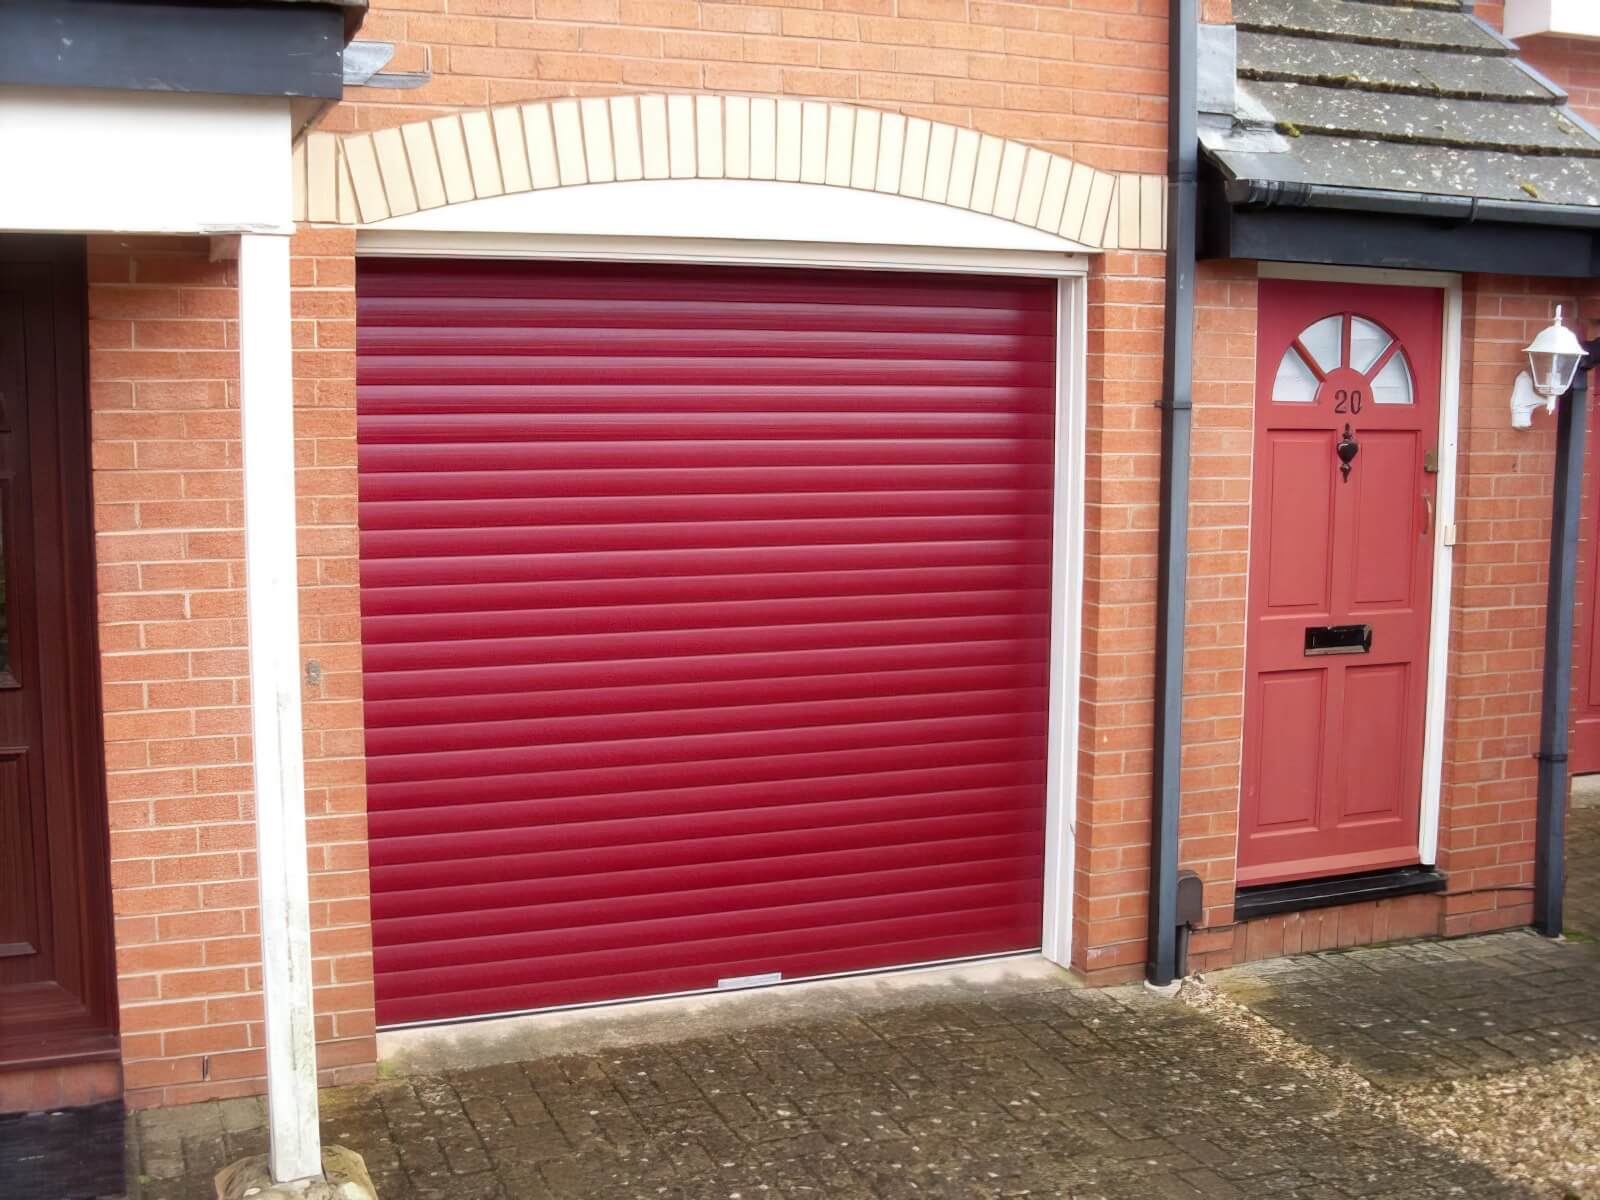 Qualified Chudleigh Roller Garage Doors experts